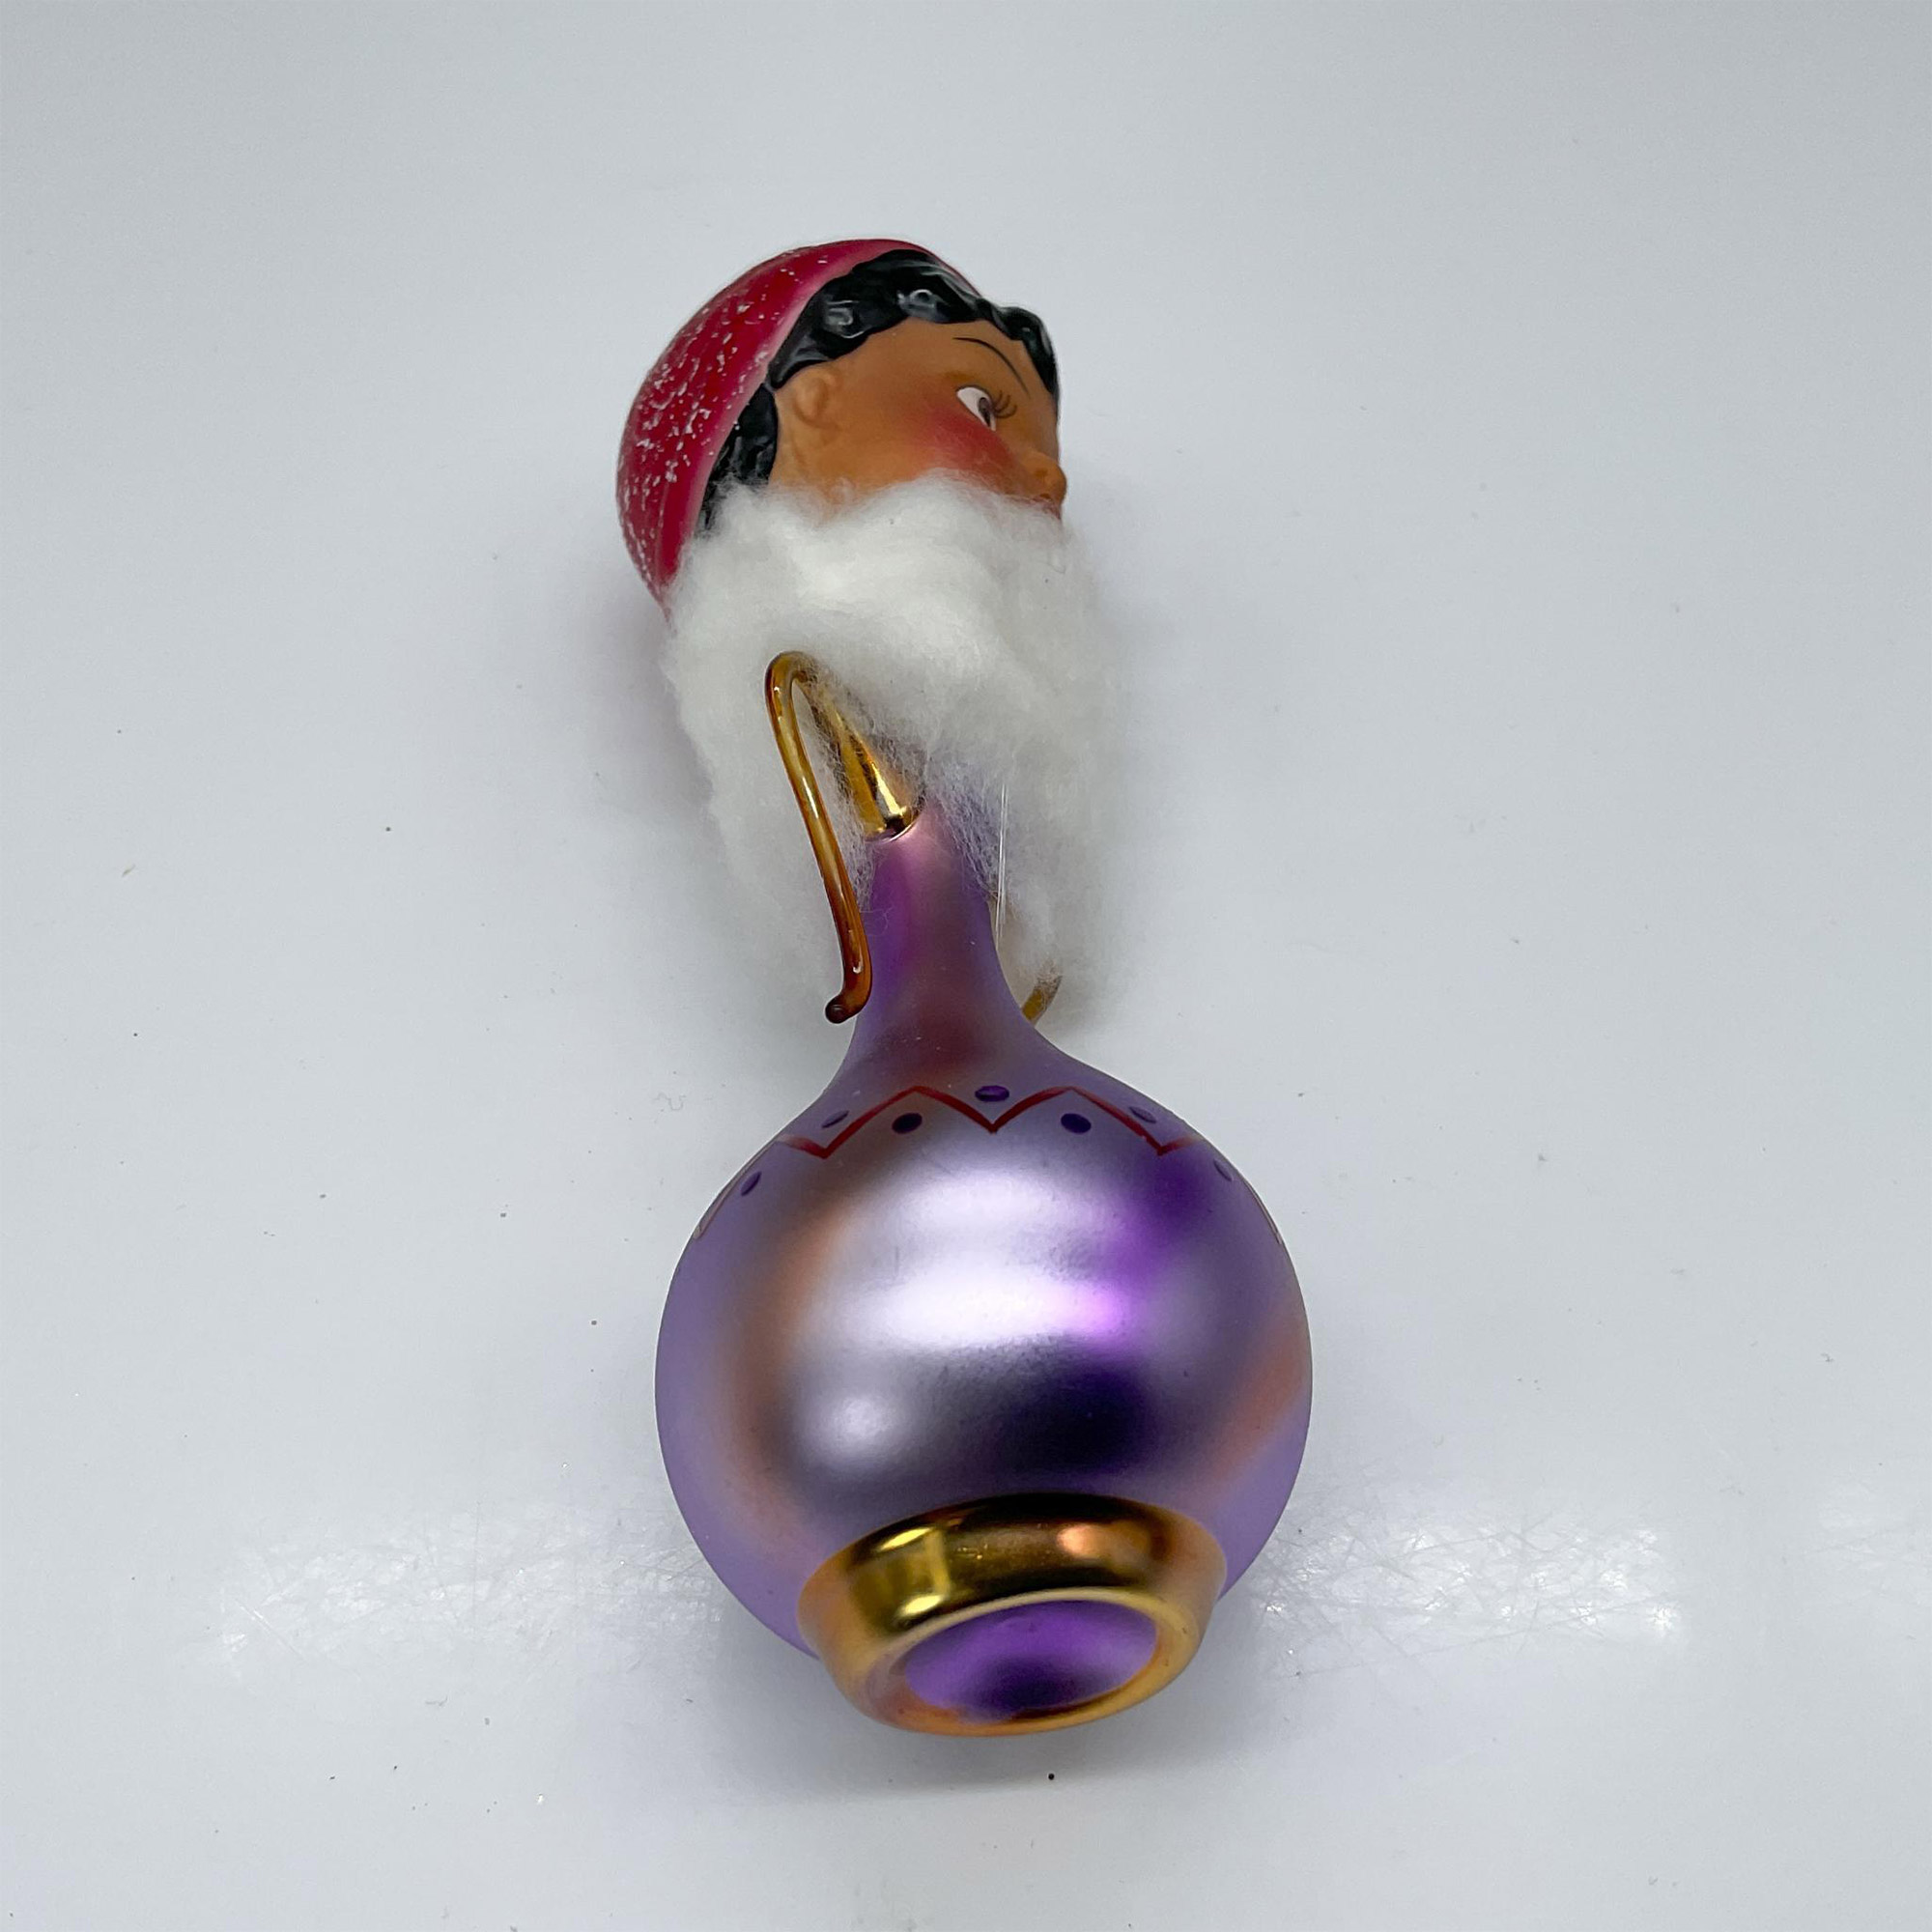 Hand Blown Glass Christmas Ornament, Genie - Image 3 of 3